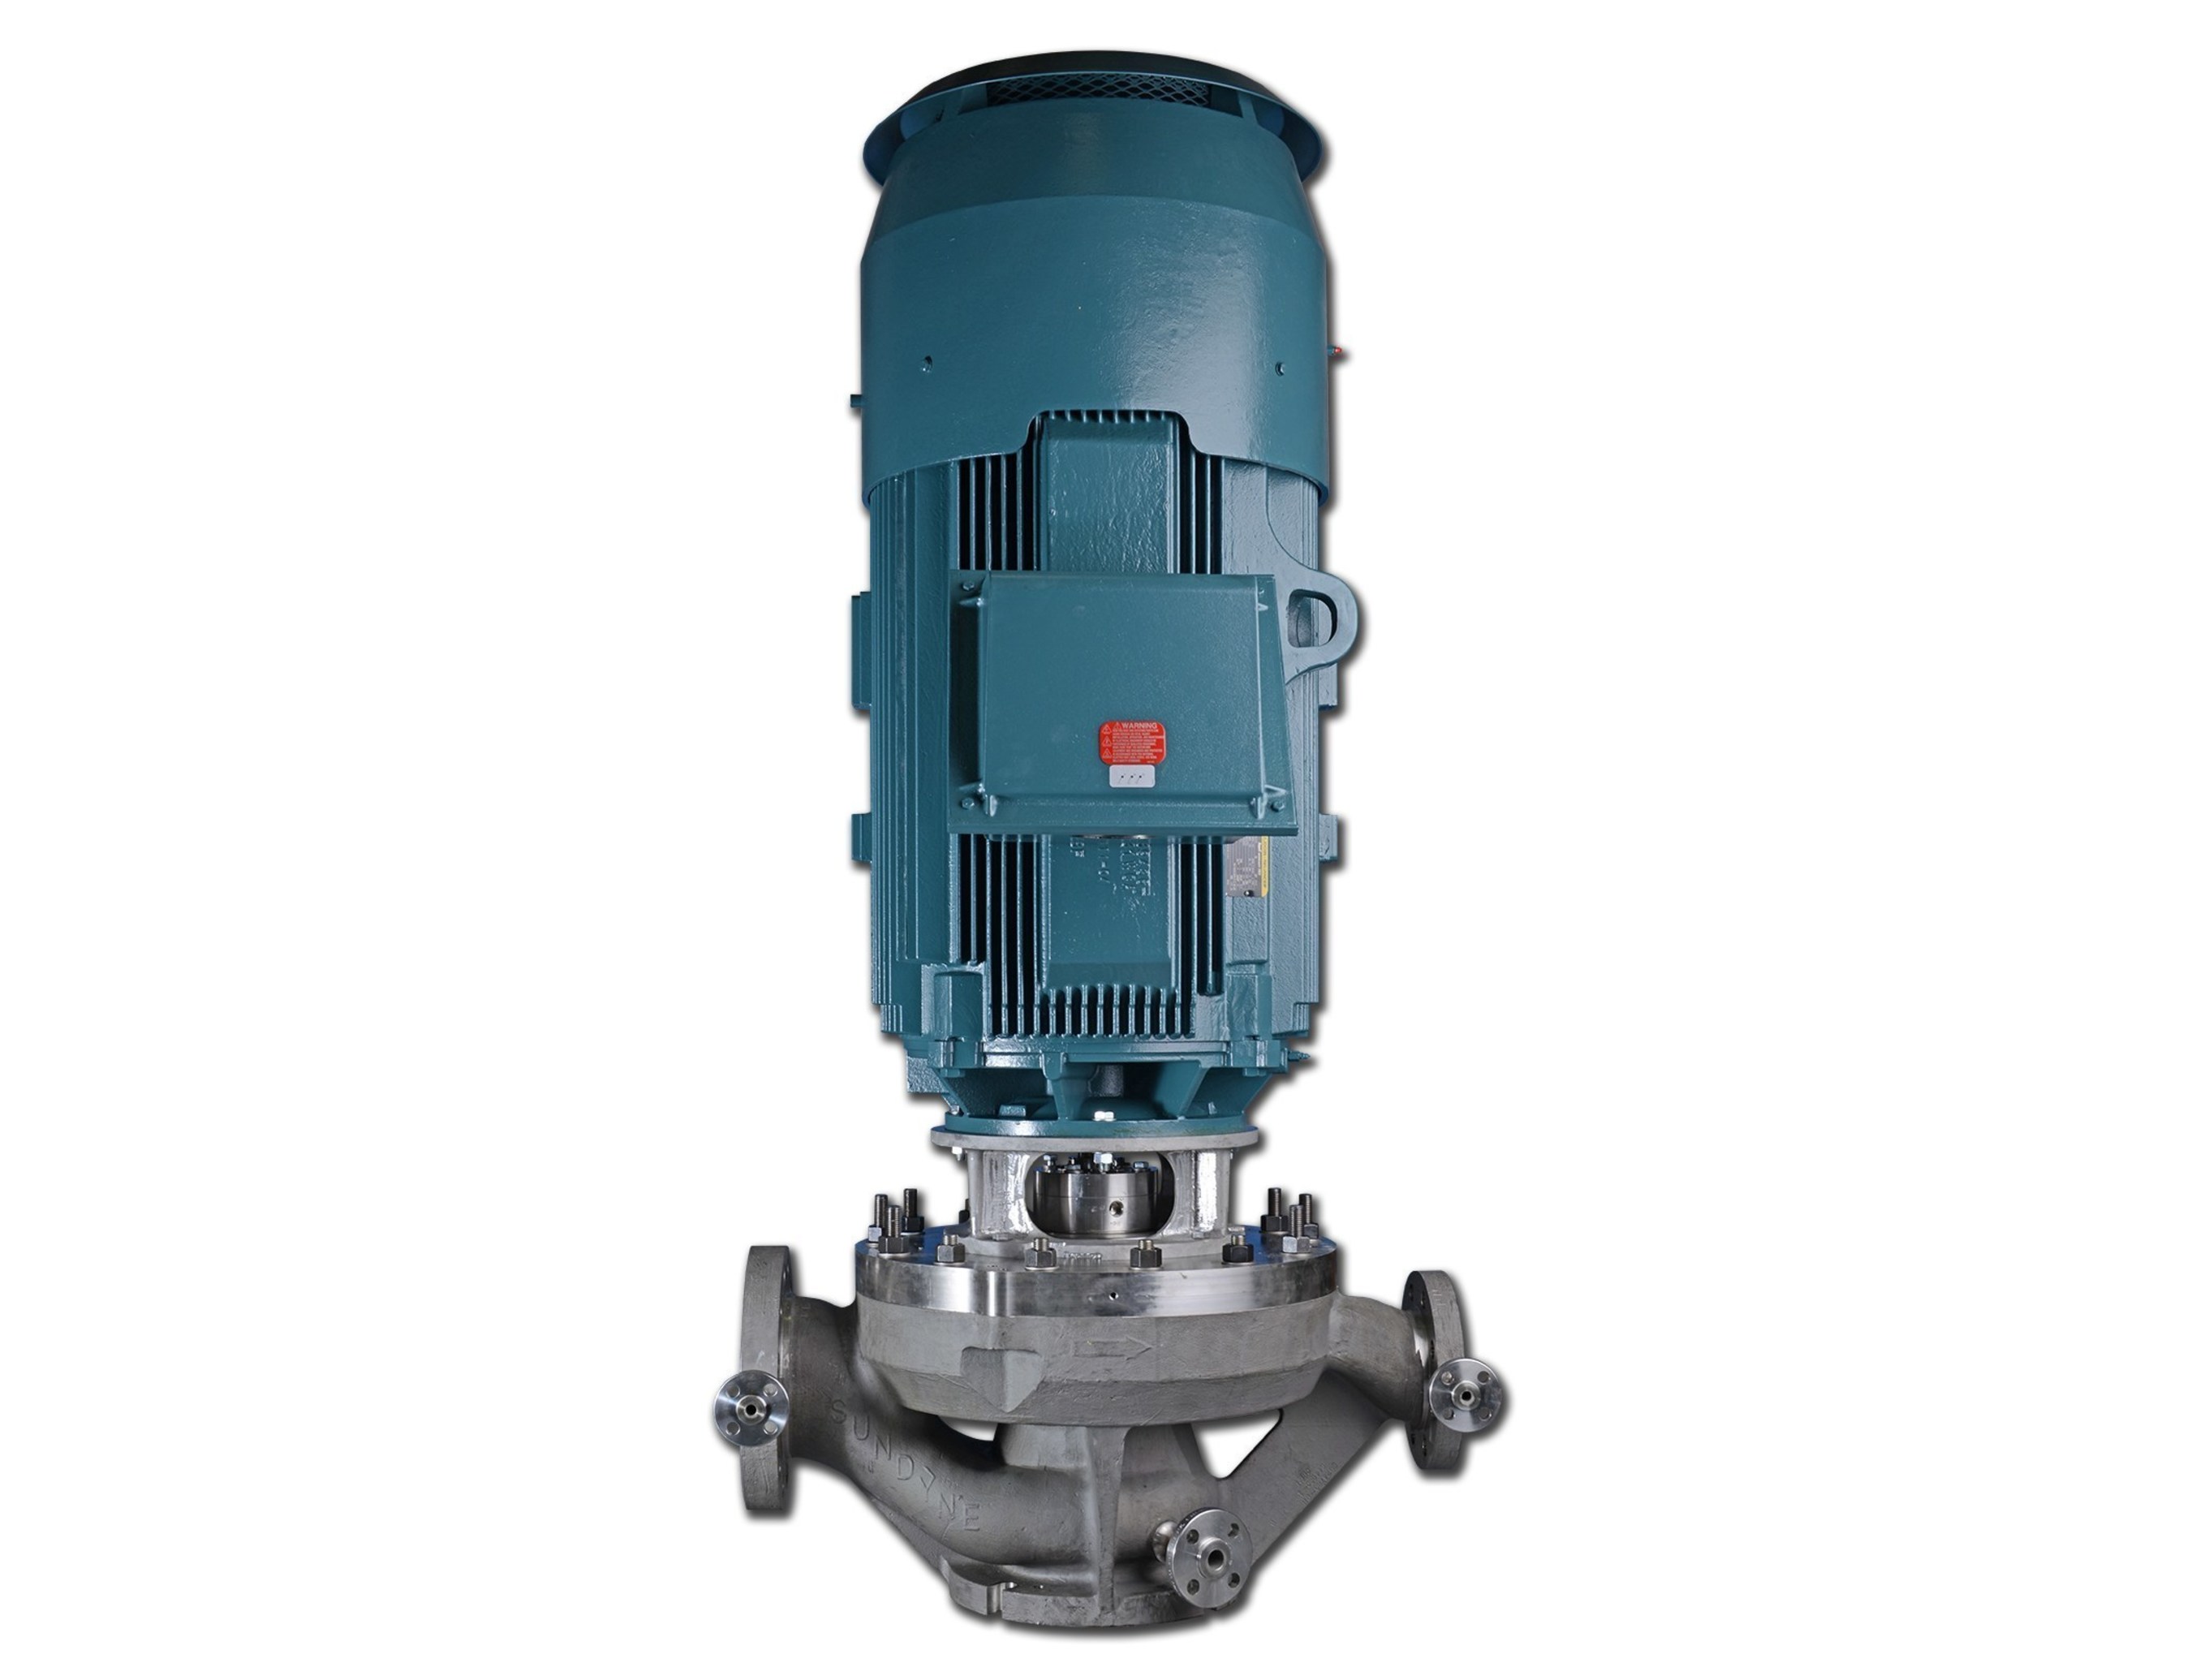 The LMV-803Lr is the high-flow variant of the popular Sundyne LMV technology in a direct-drive package. The LMV-803Lr features Sundyne inducer technology and a backswept impeller, thus allowing it to reach lower NPSH requirements than competitive models without risk of cavitation.